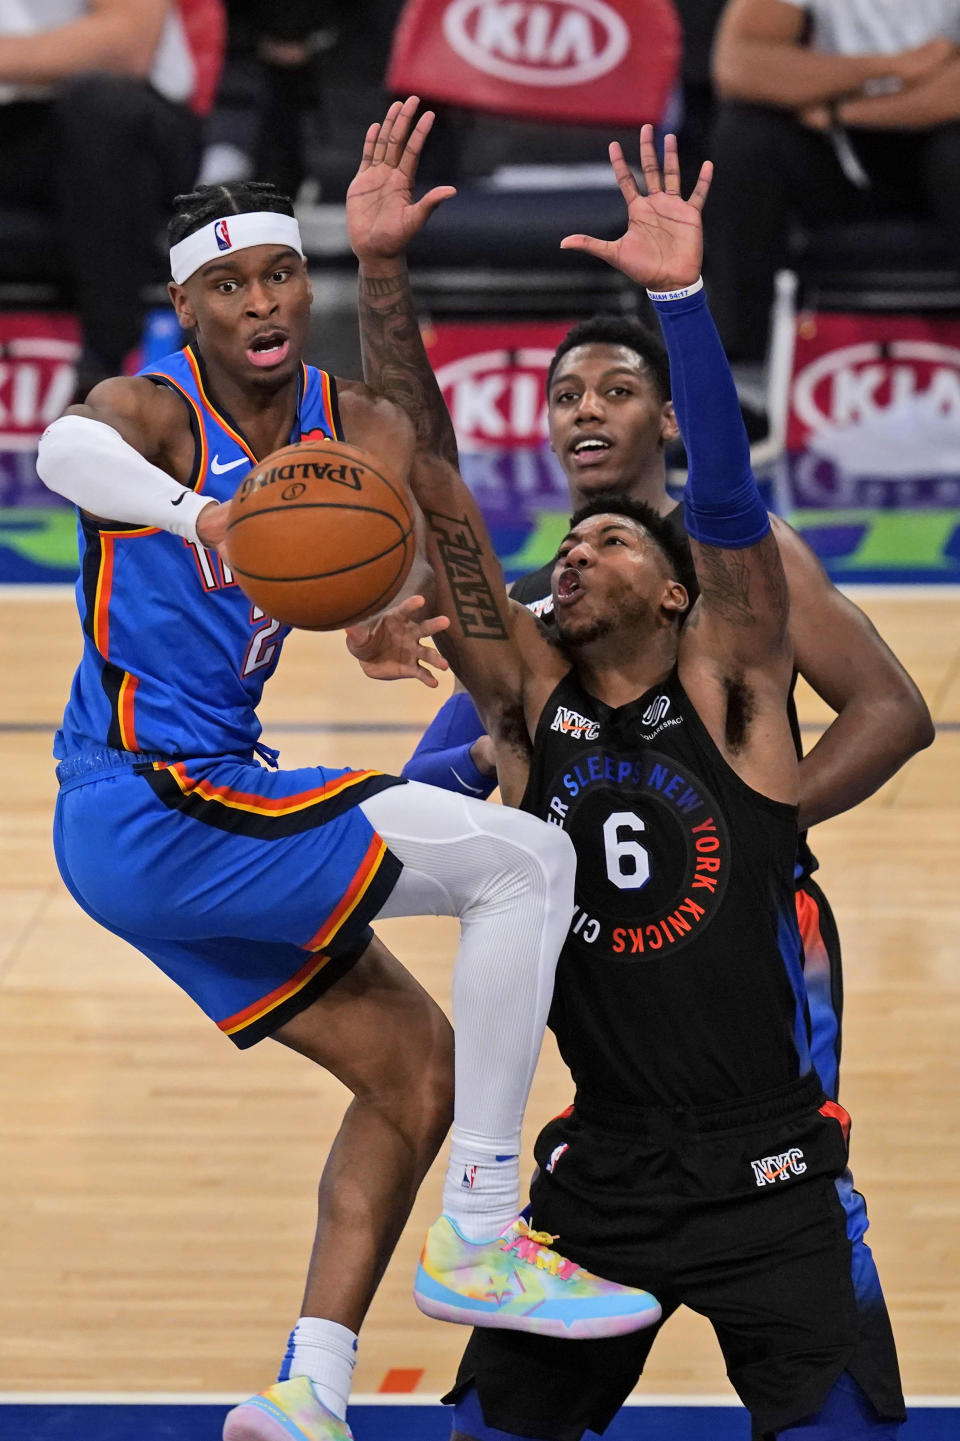 Oklahoma City Thunder's Shai Gilgeous-Alexander, left, passes around New York Knicks defenders during the first half of an NBA basketball game, Friday, Jan. 8, 2021, in New York. (AP Photo/Seth Wenig, Pool)